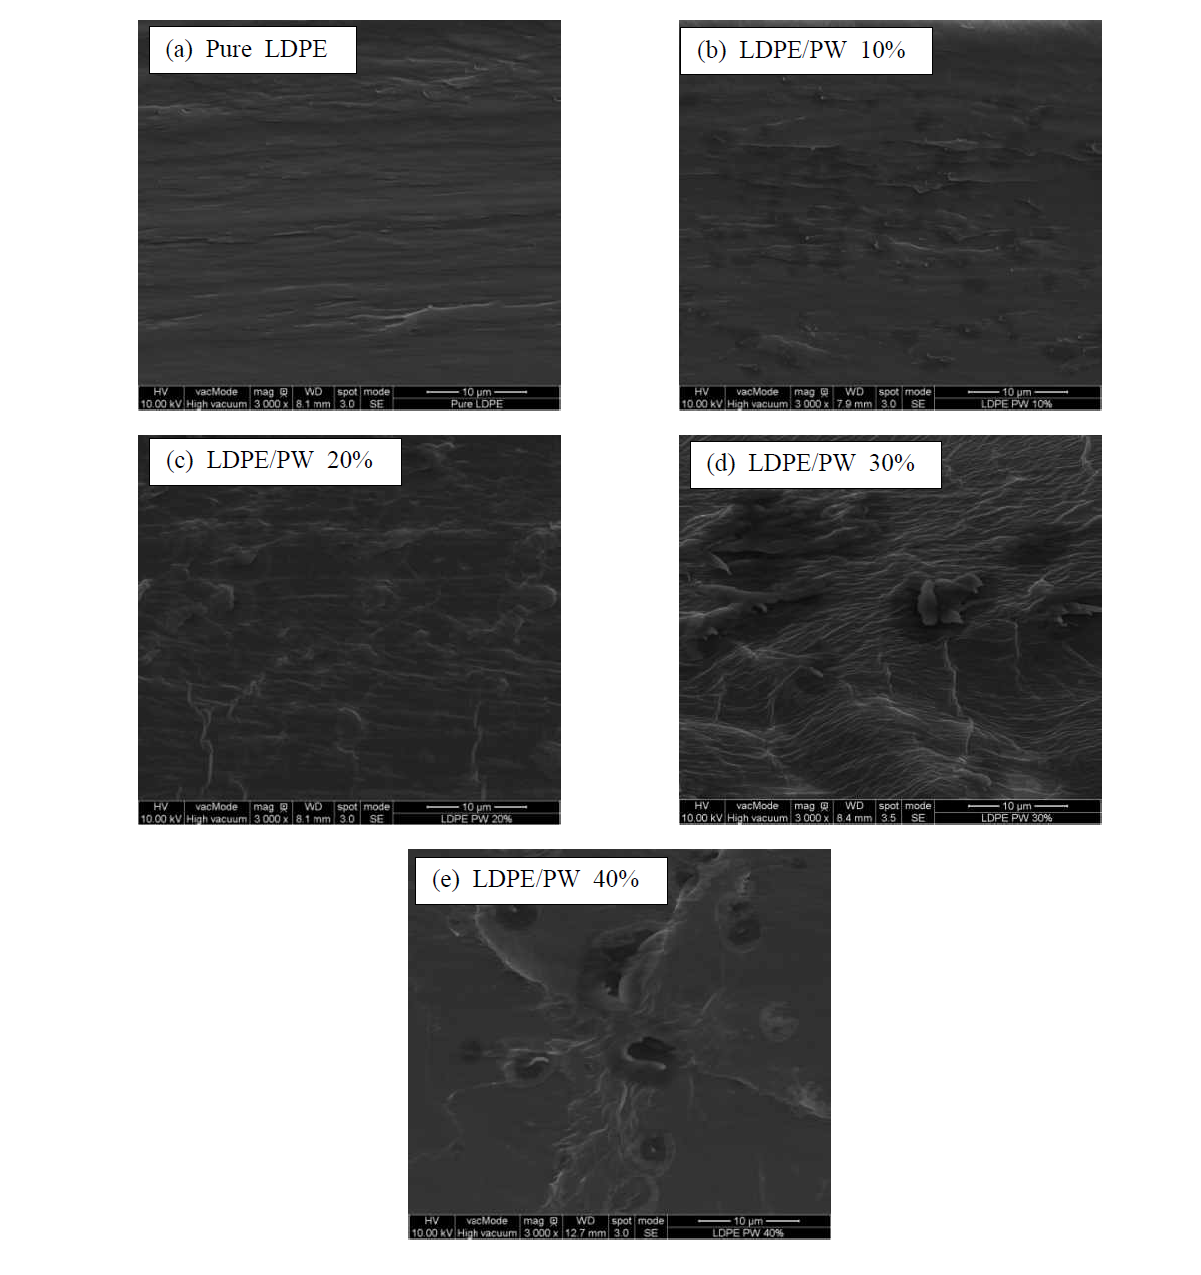 SEM images for the fractured surfaces of the LDPE/PW composite films.